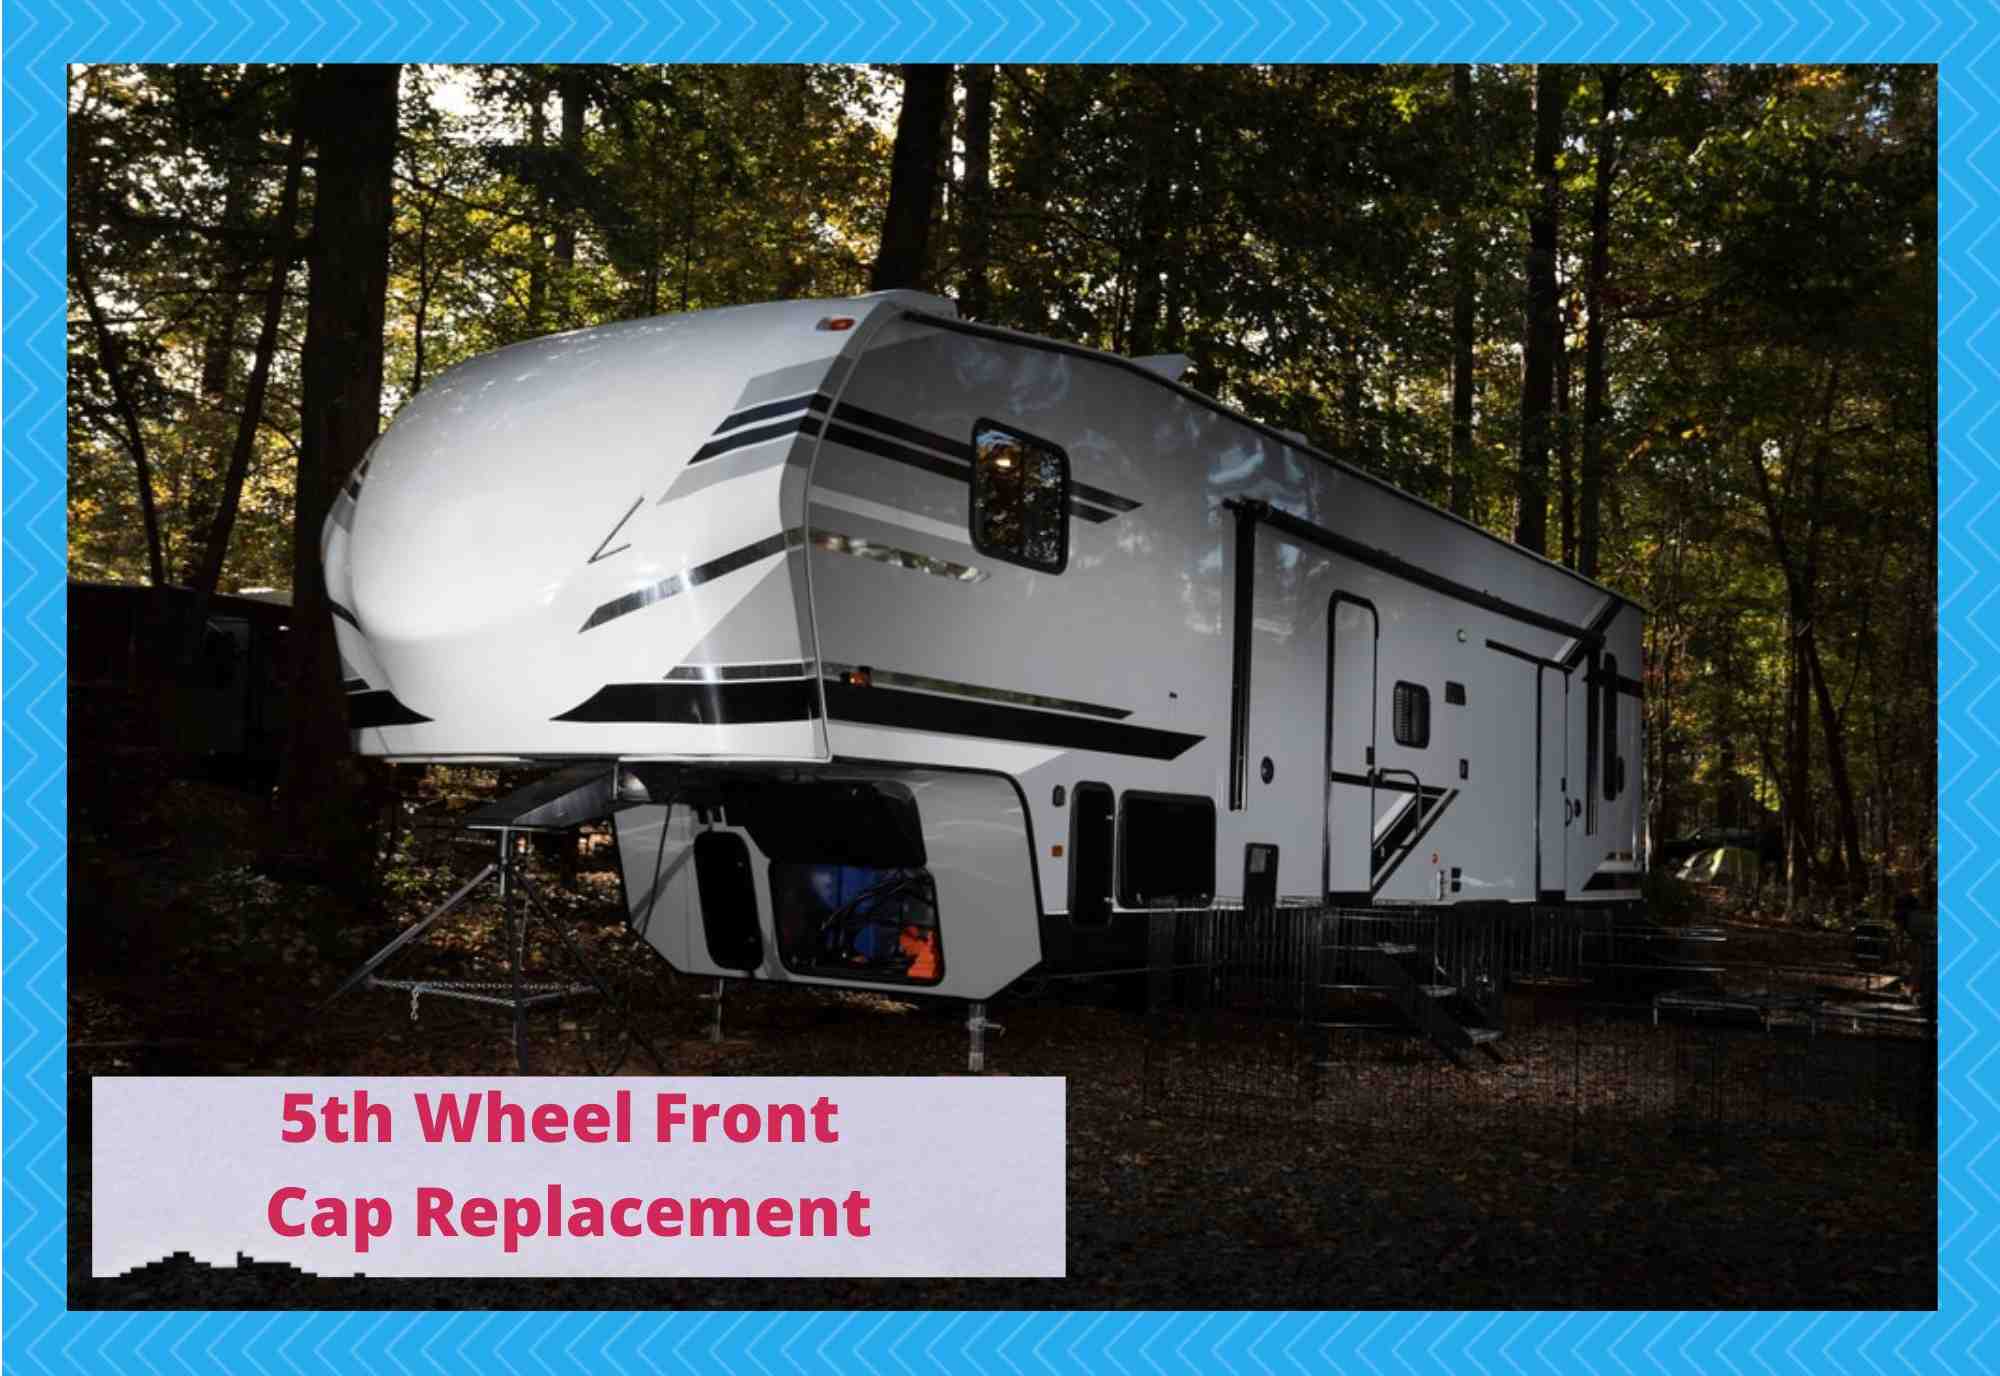 5th wheel front cap replacement